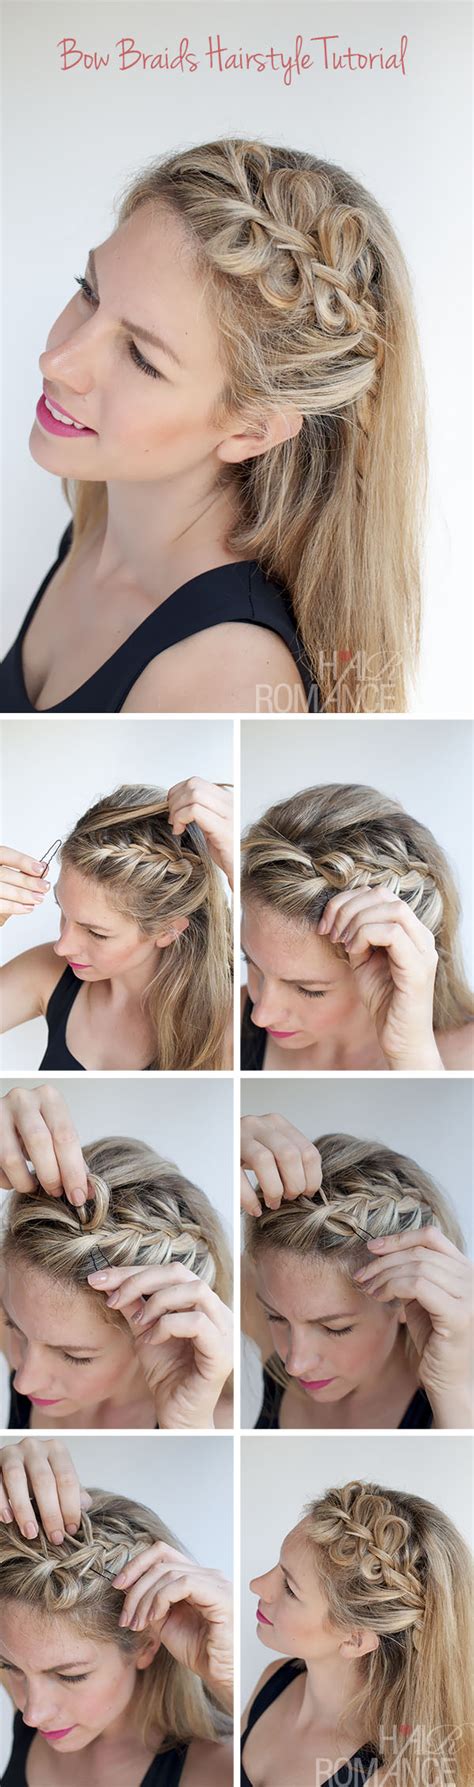 Create three french braided bang hairstyles for medium and long hair. 12 Romantic Braided Hairstyles With Useful Tutorials ...